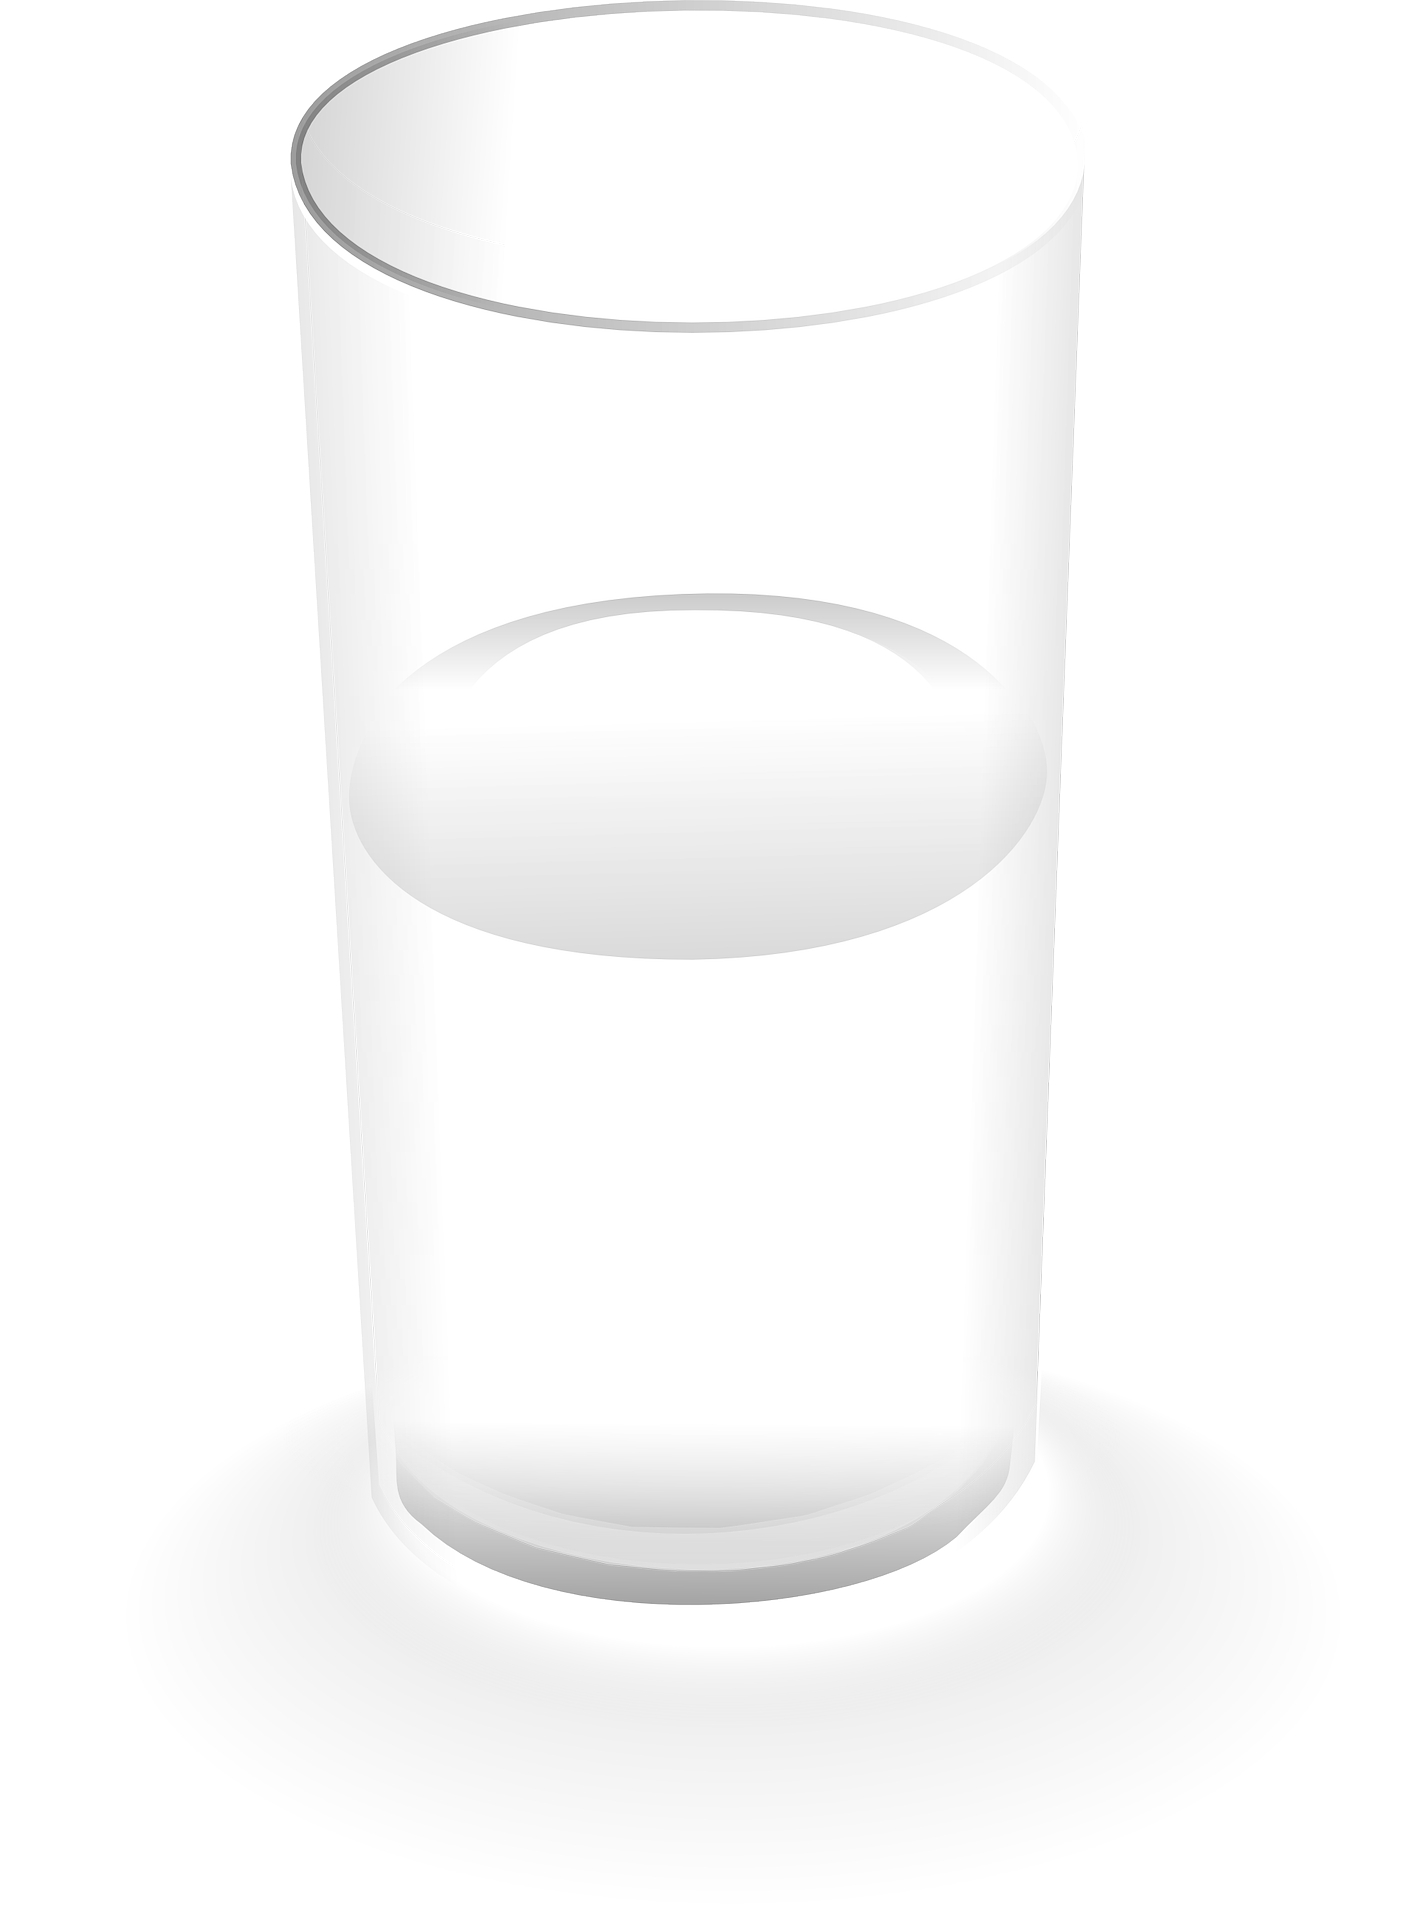 Glass cup,water,drink vector